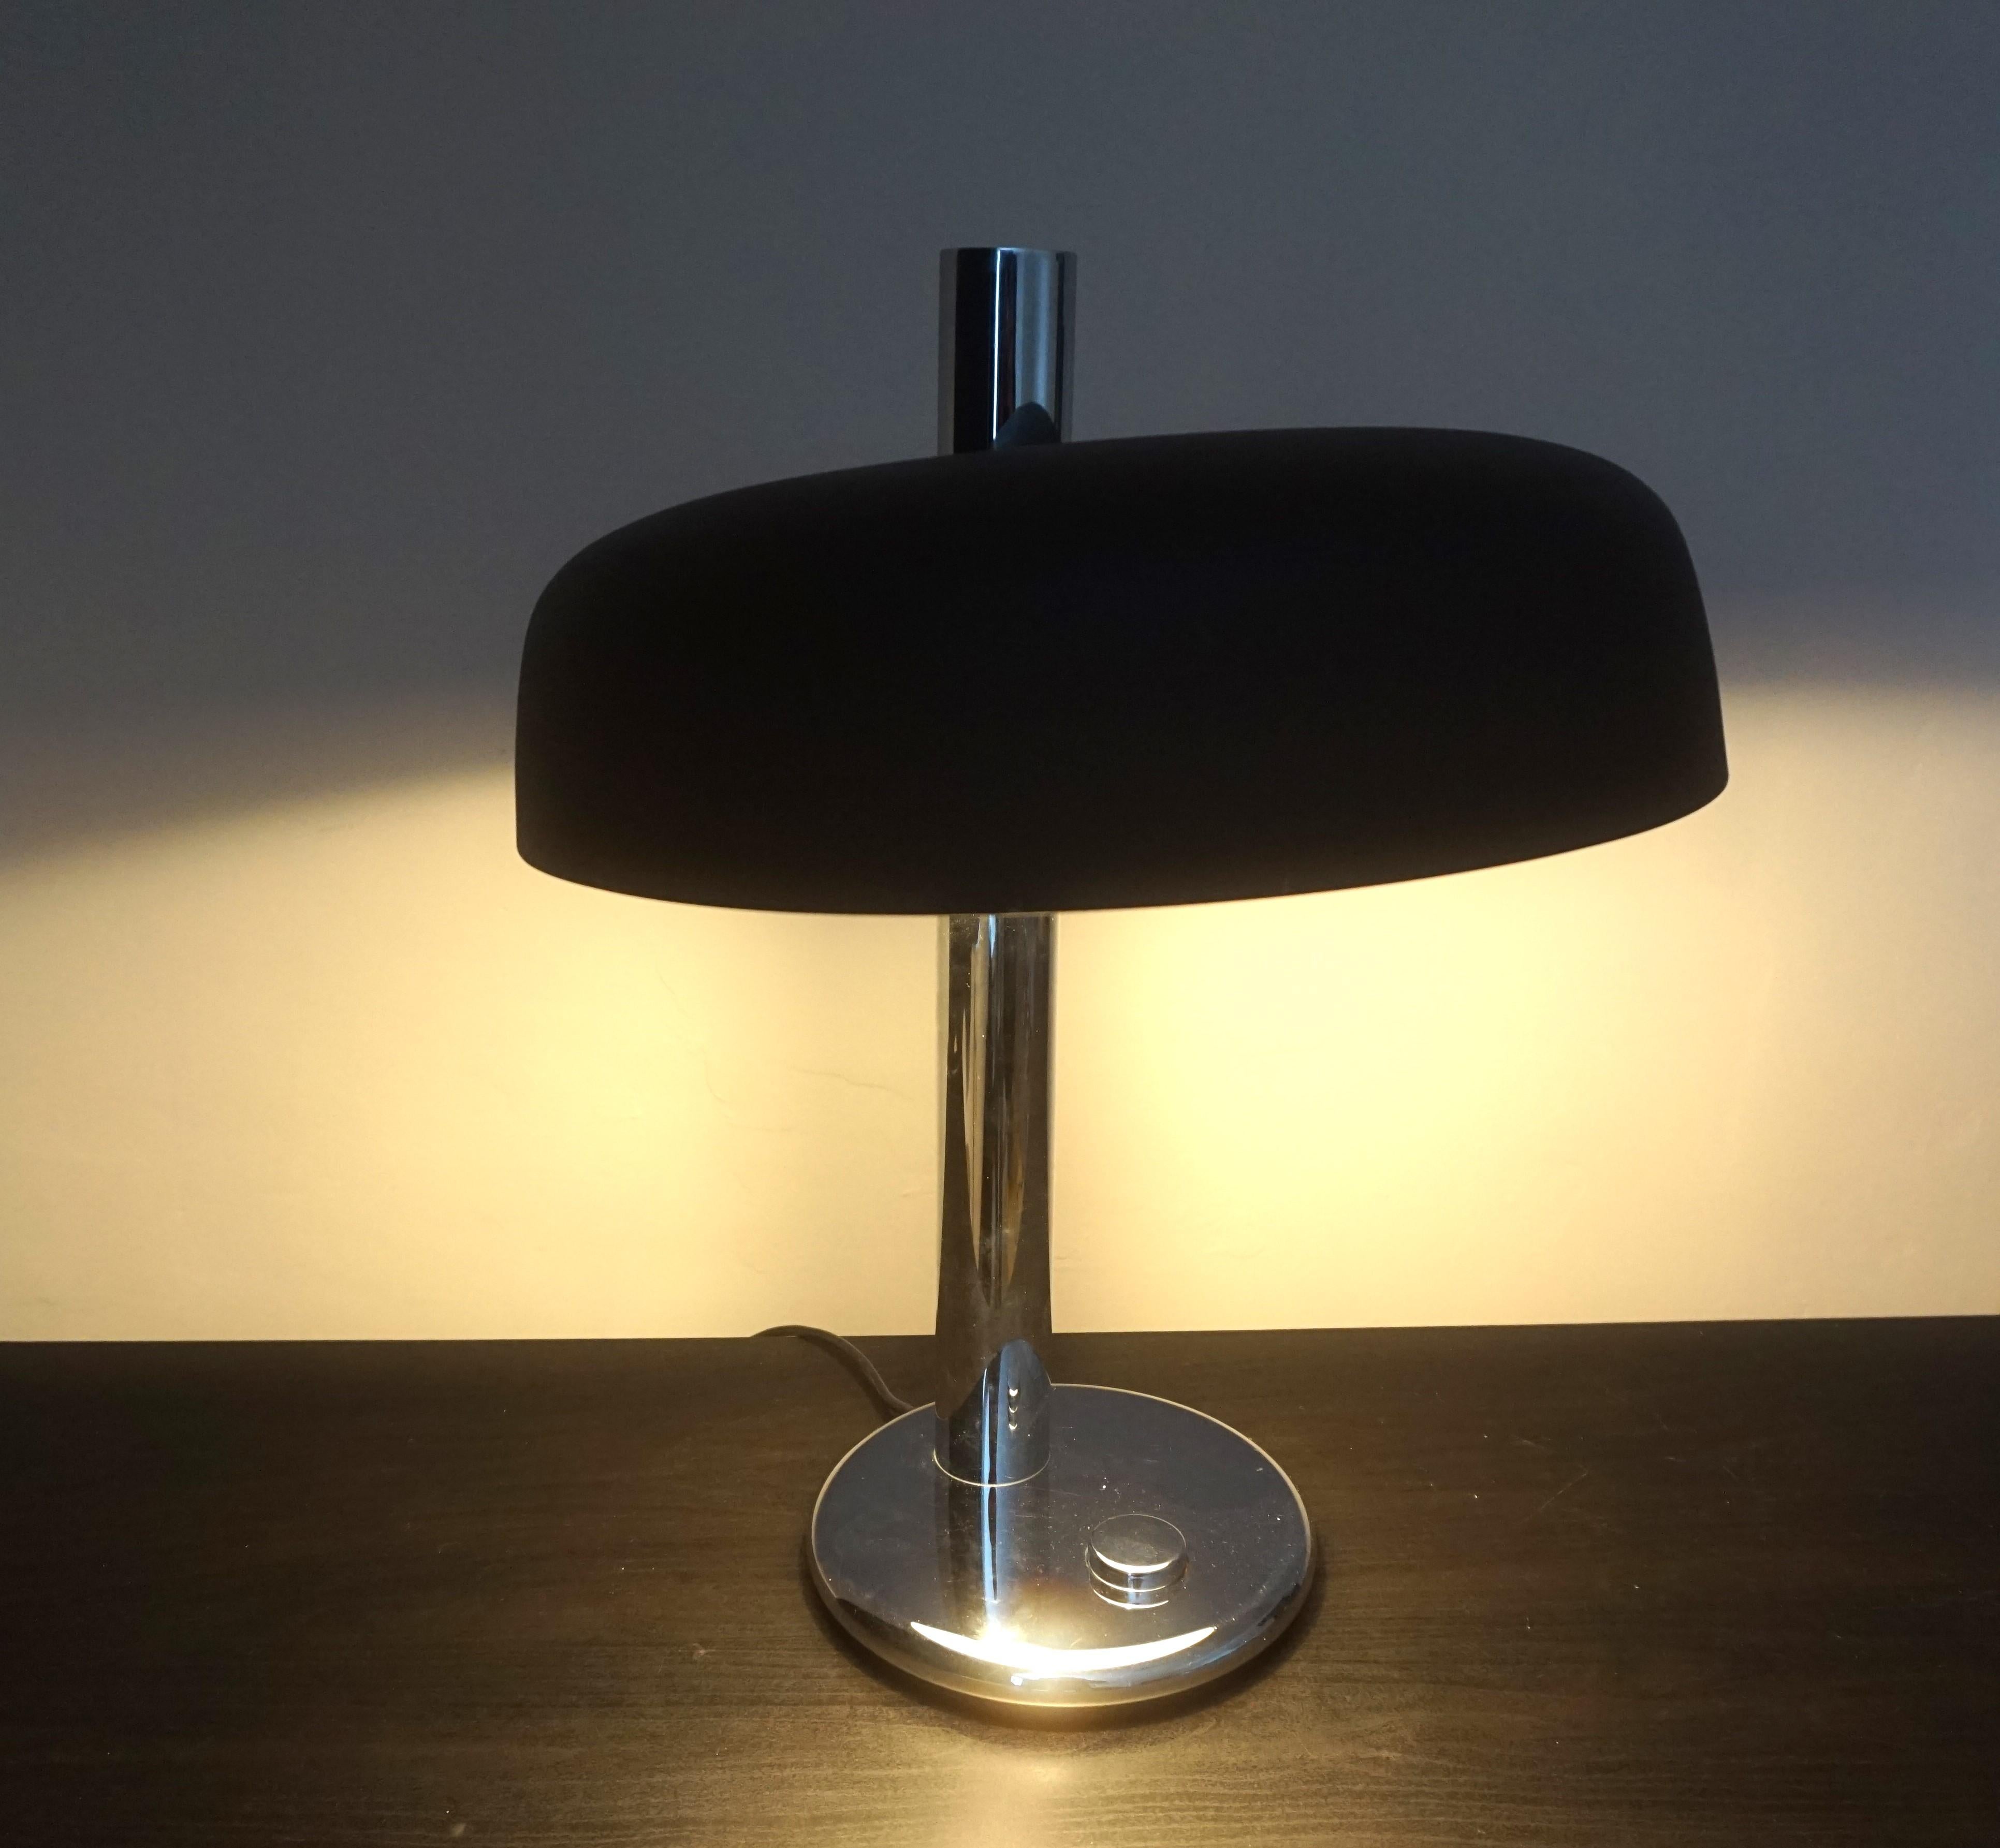 The large table lamp in the more elegant version with a chrome base and brown lampshade is in good condition. The base shows almost no signs of use, the brown metal shade shows signs of wear on one side. The large switch button works perfectly, the